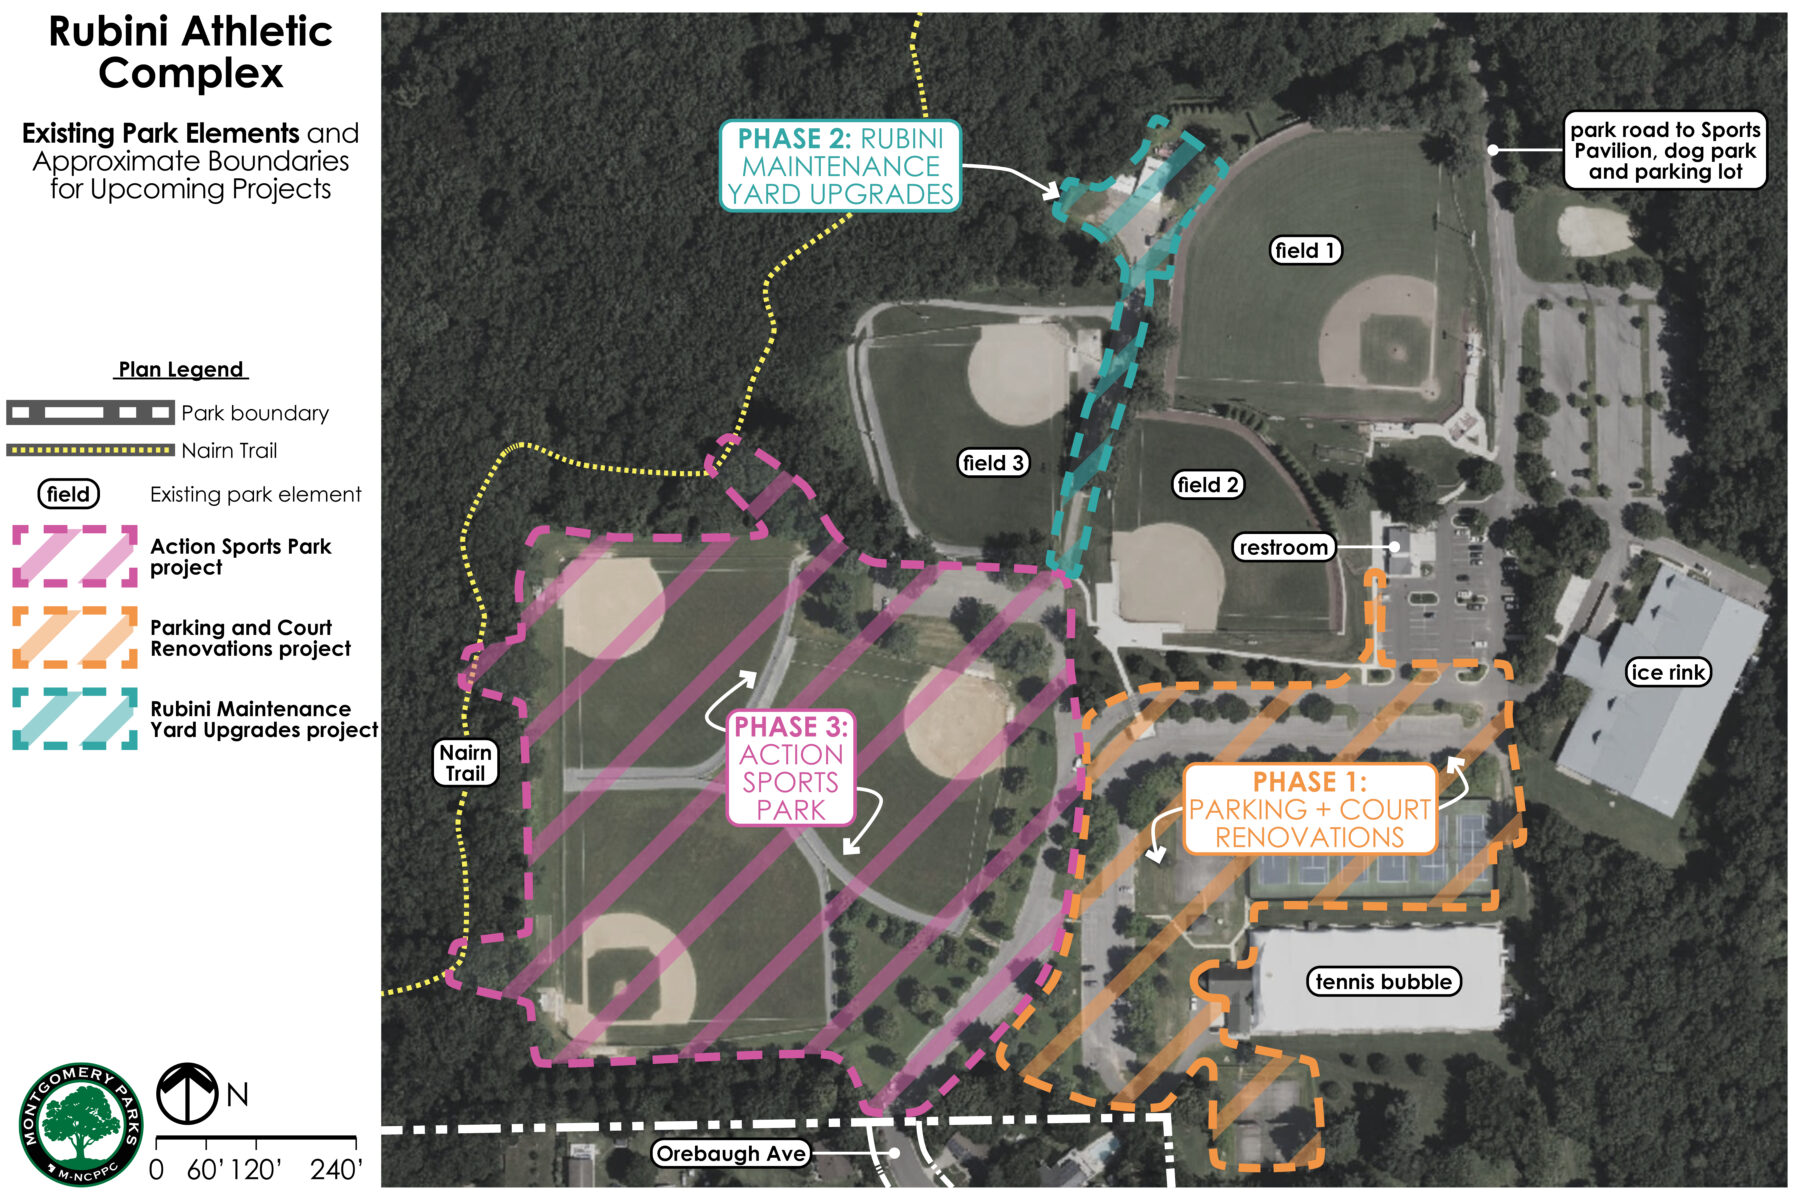 Enlarged aerial map of the Rubini Athletic Complex, showing approximate boundaries of three projects: Action Sports Park, parking/court renovation project, and ballfield maintenance yard project.